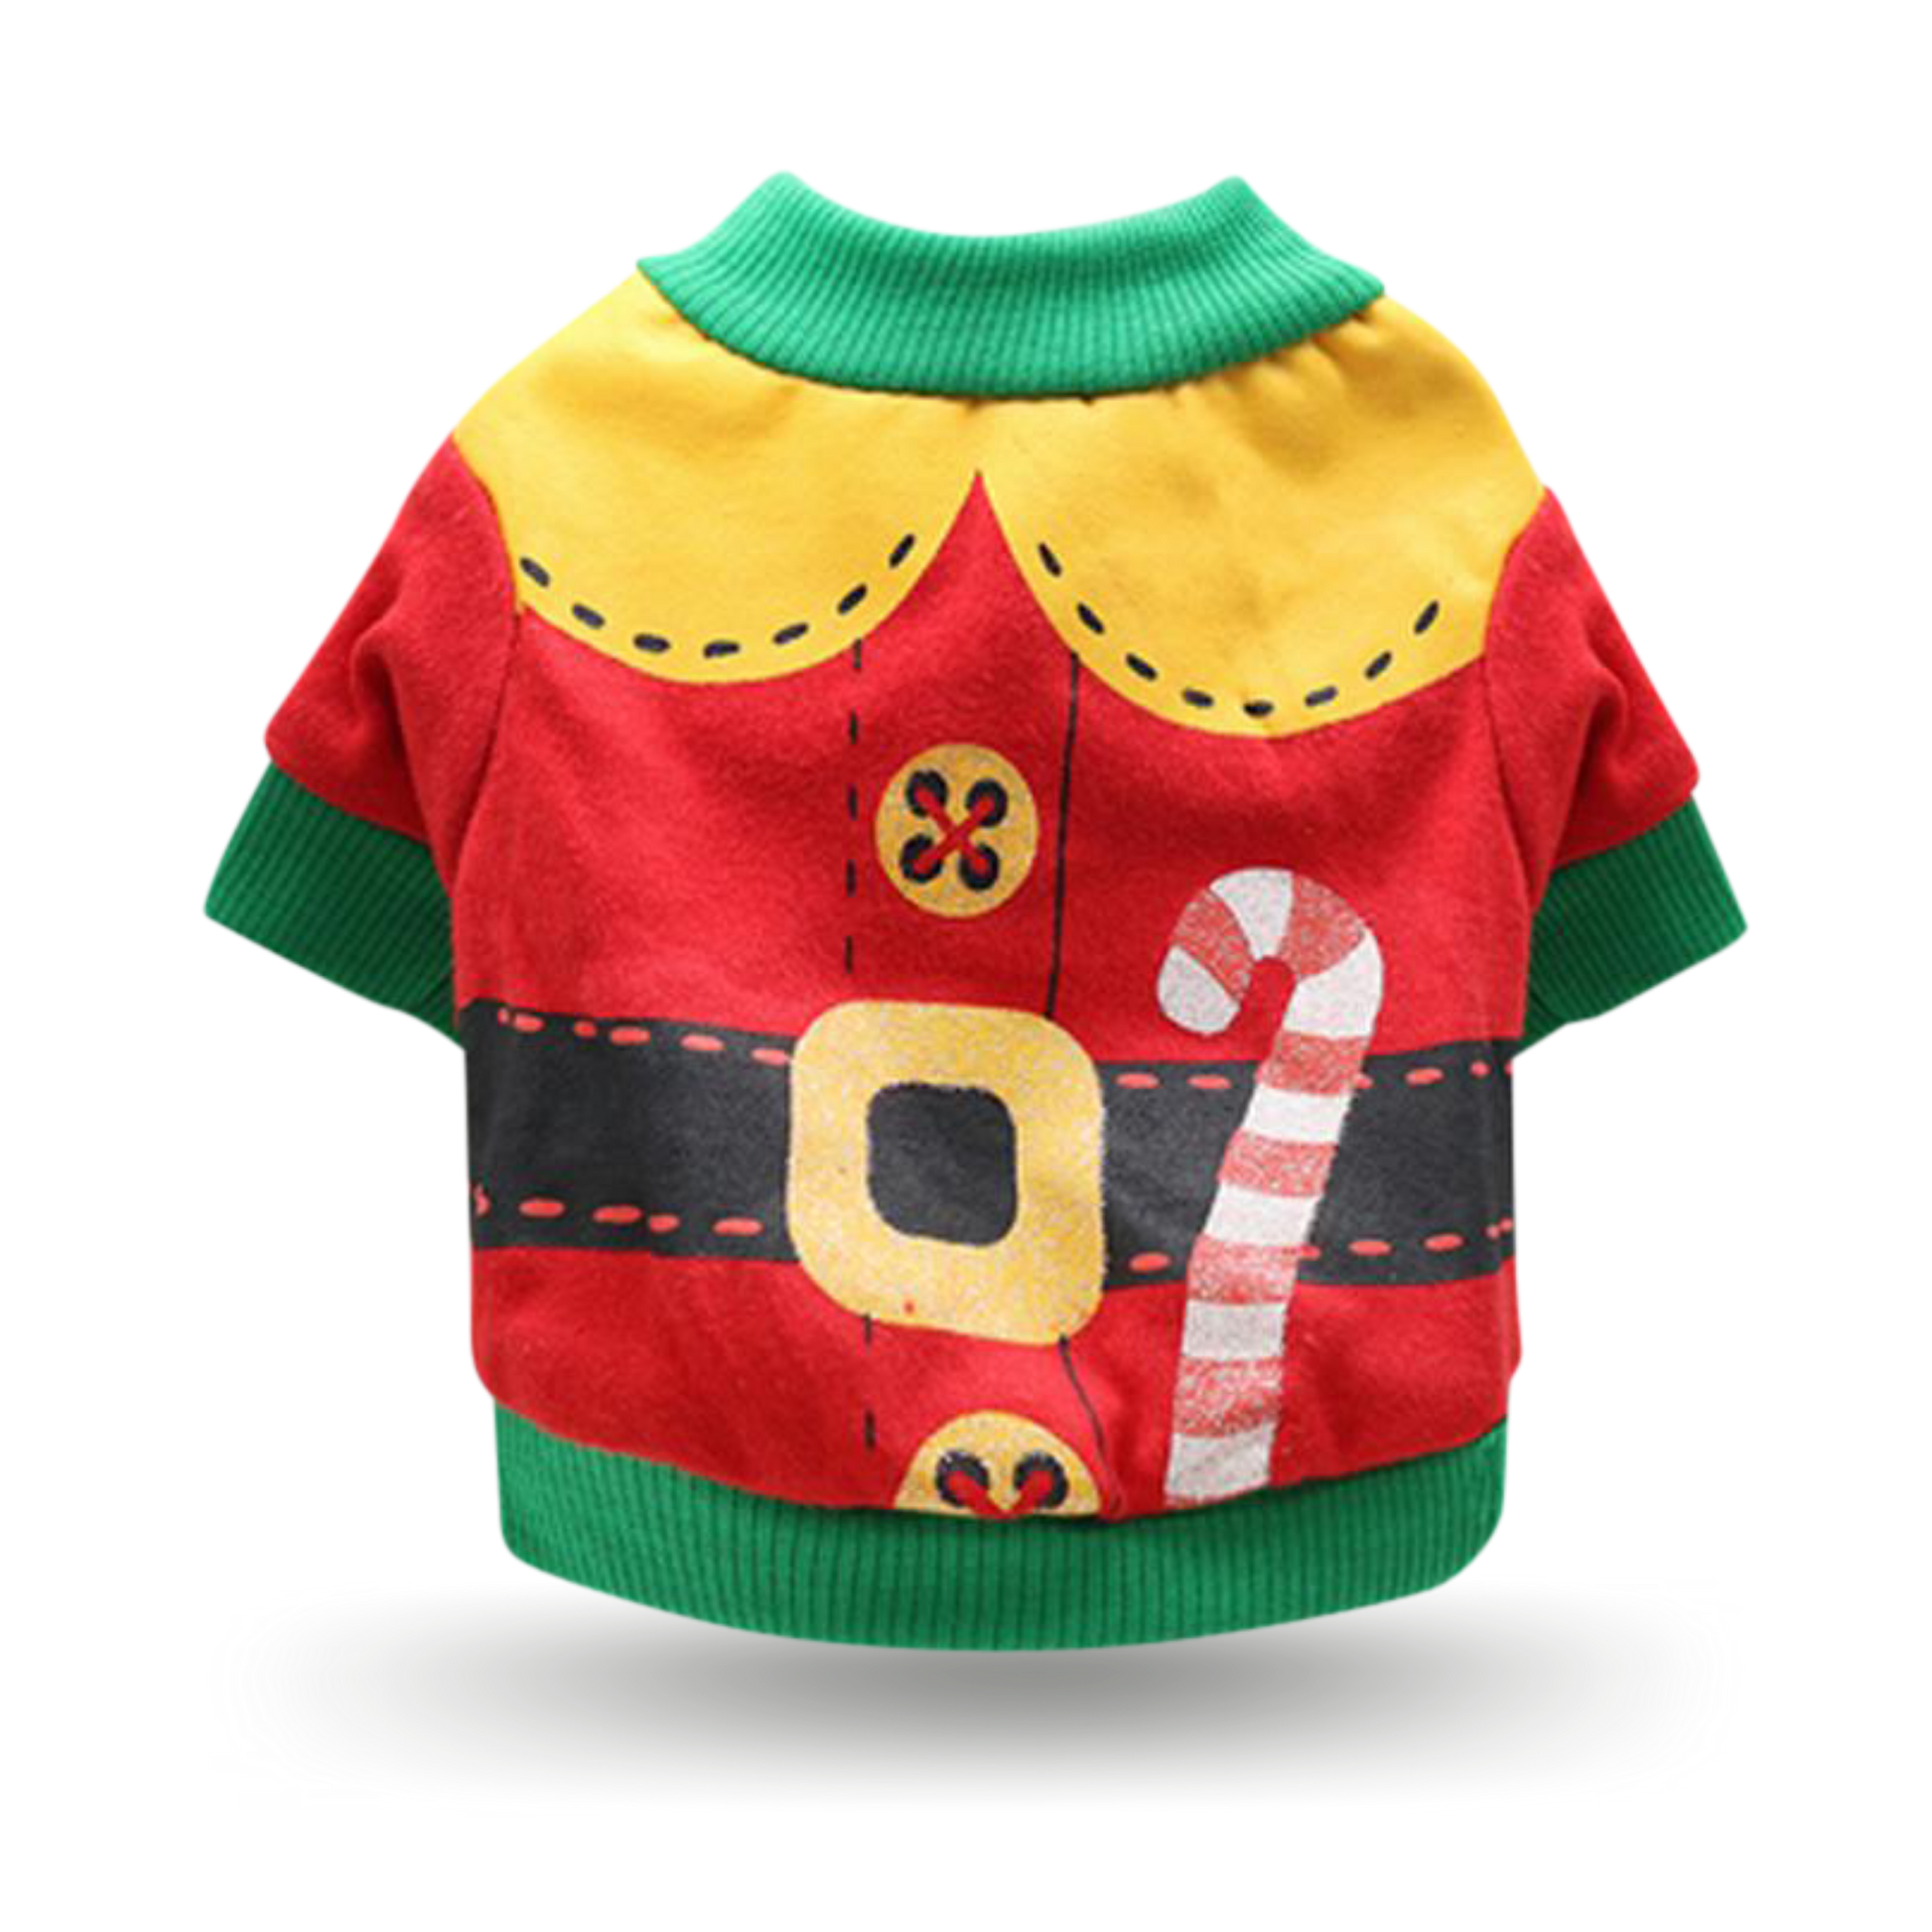 Soft cotton t-shirt with ribbing collar, arm and waist bands with red elf uniform and candy cane screen printed motif